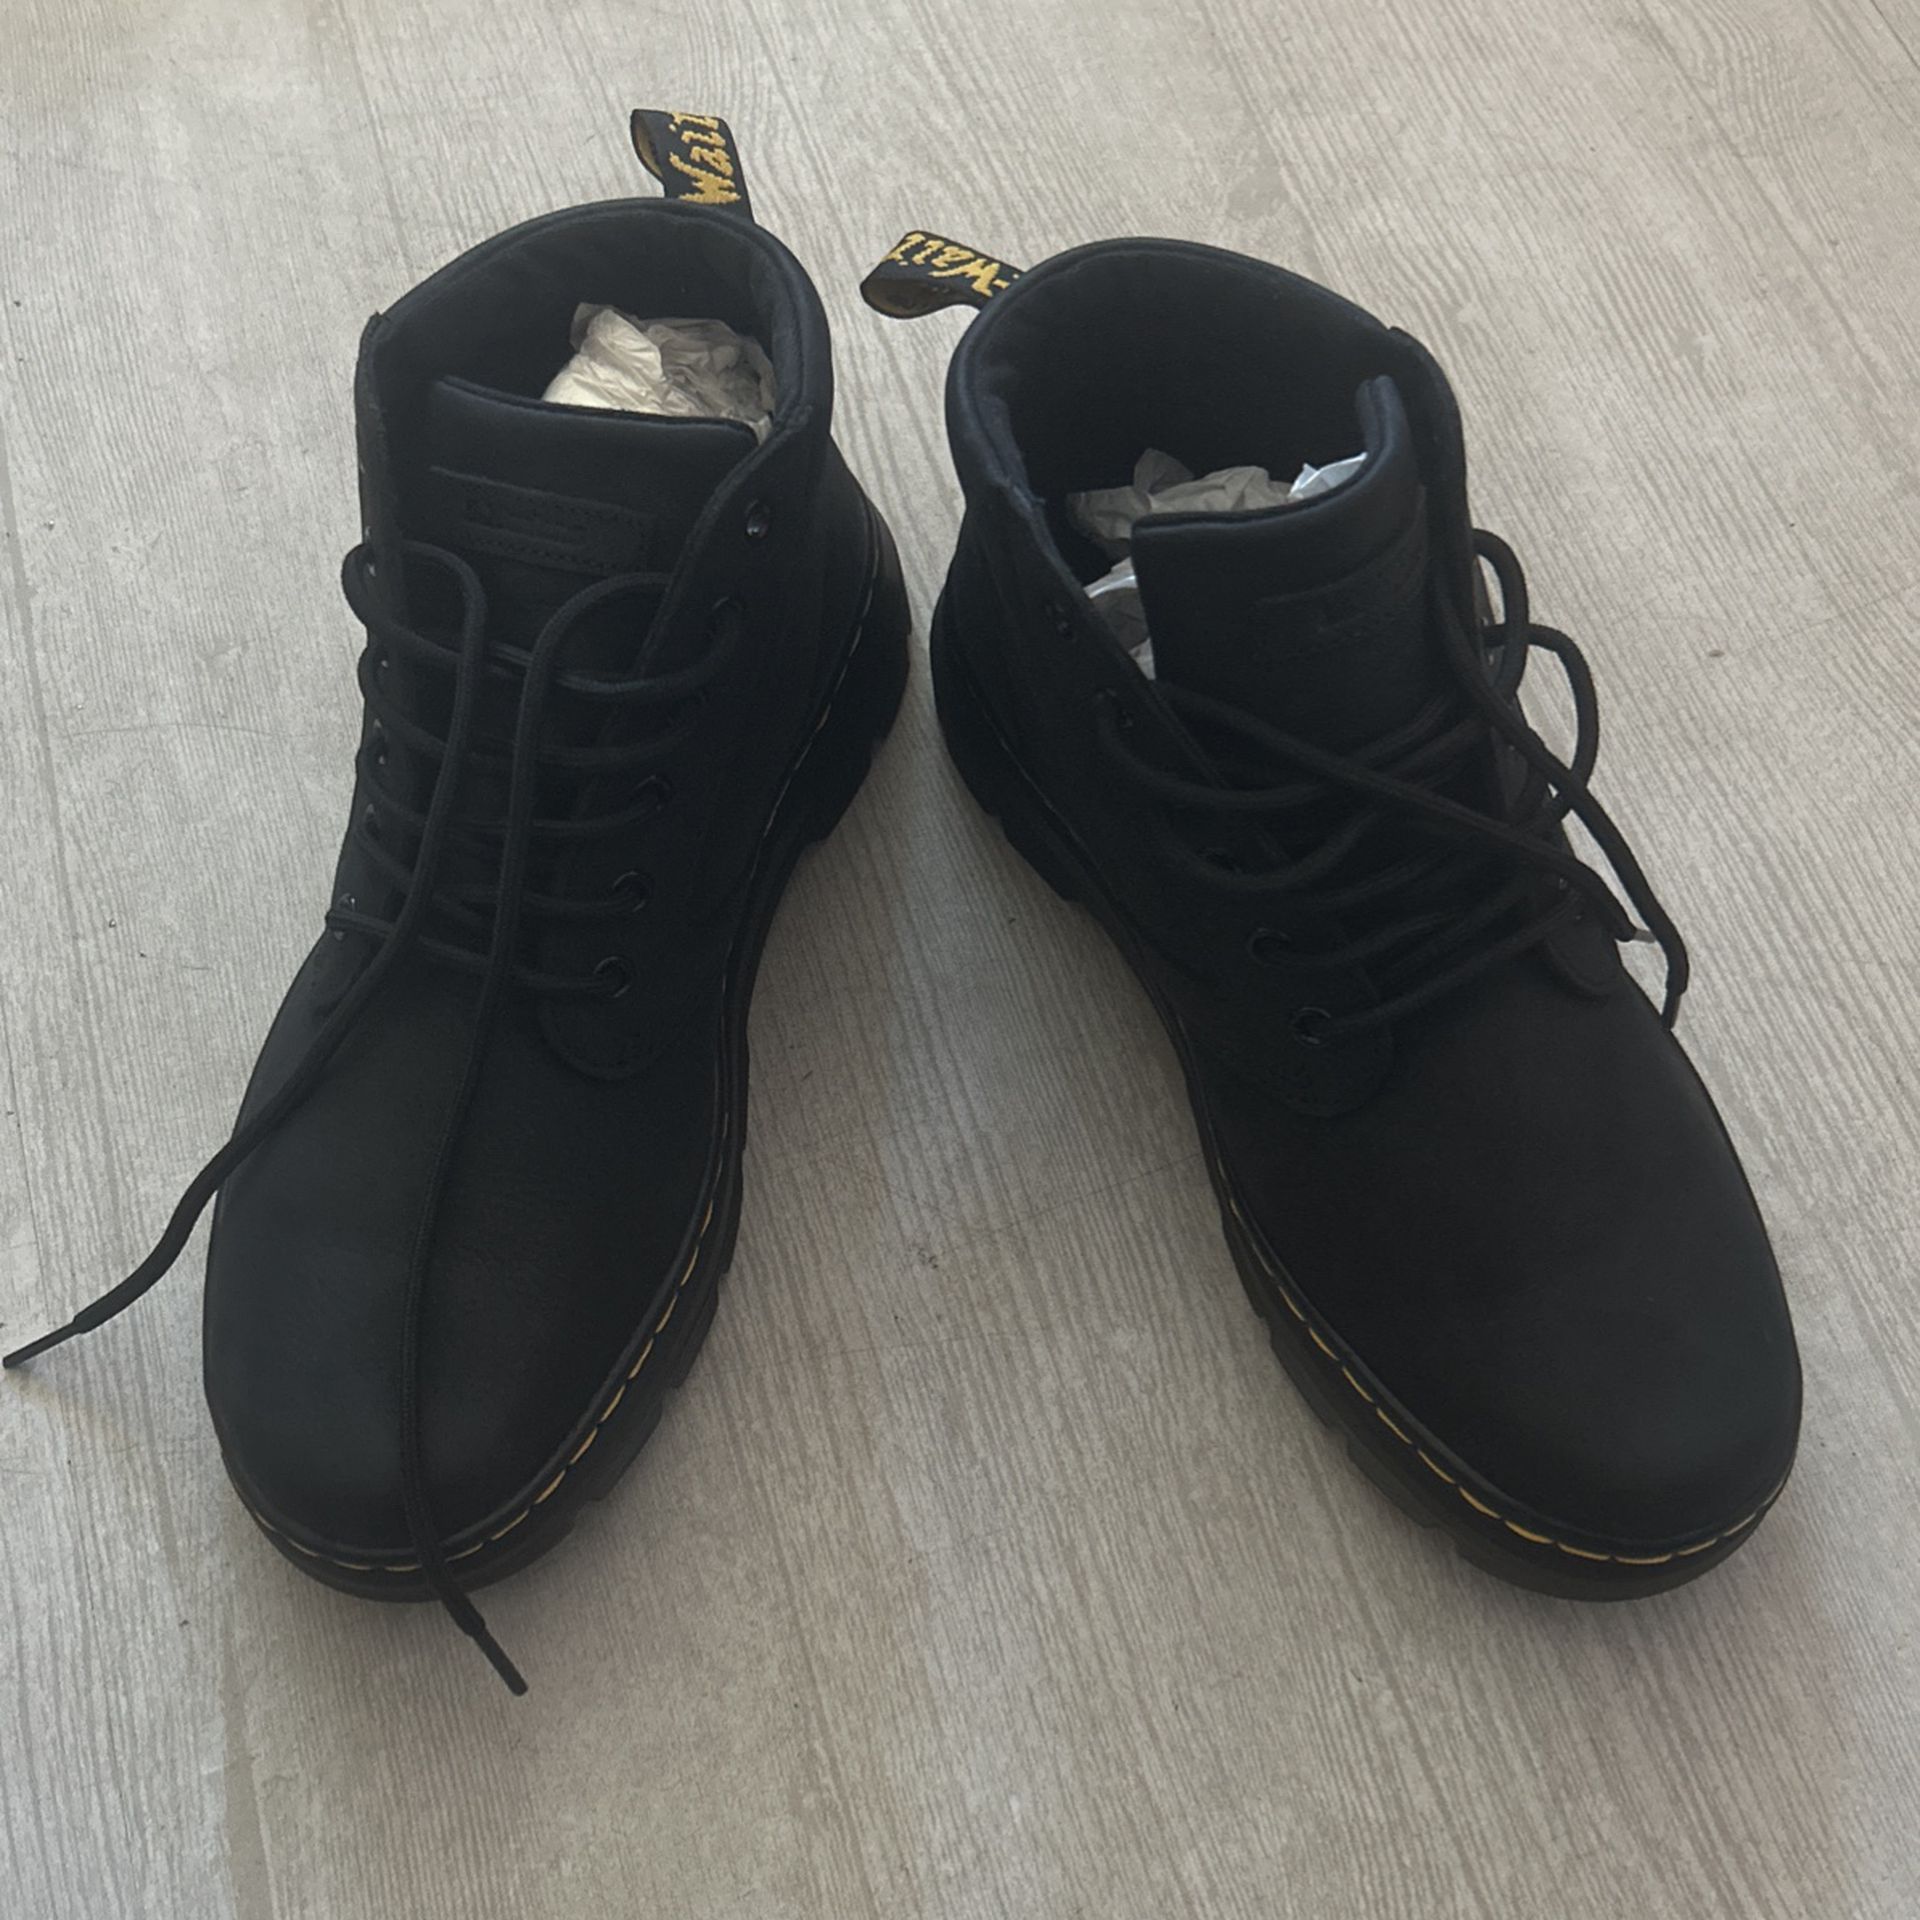 Doc Martens Men’s Boots (If This Post Is Still Up, The Item Is Still Available)